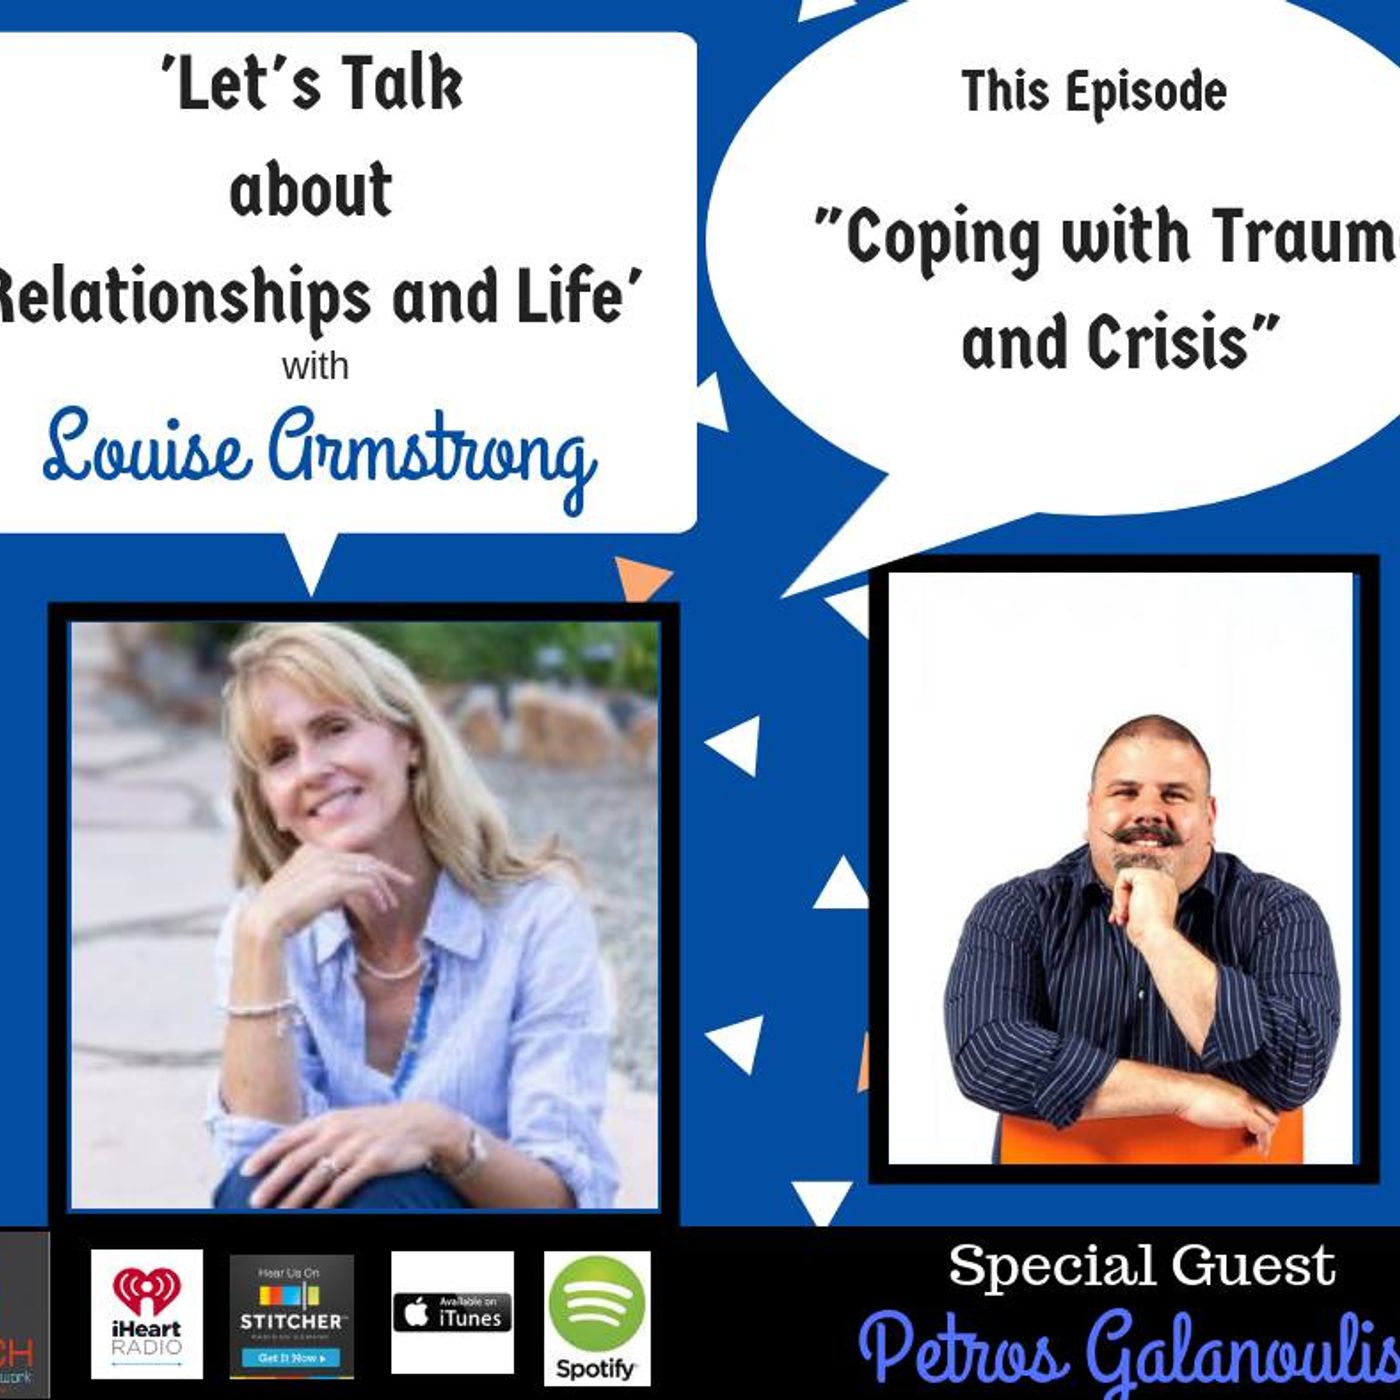 Coping with Trauma and Crisis with Special Guest, Personal Crisis coach/Counsellor Petros Galanoulis